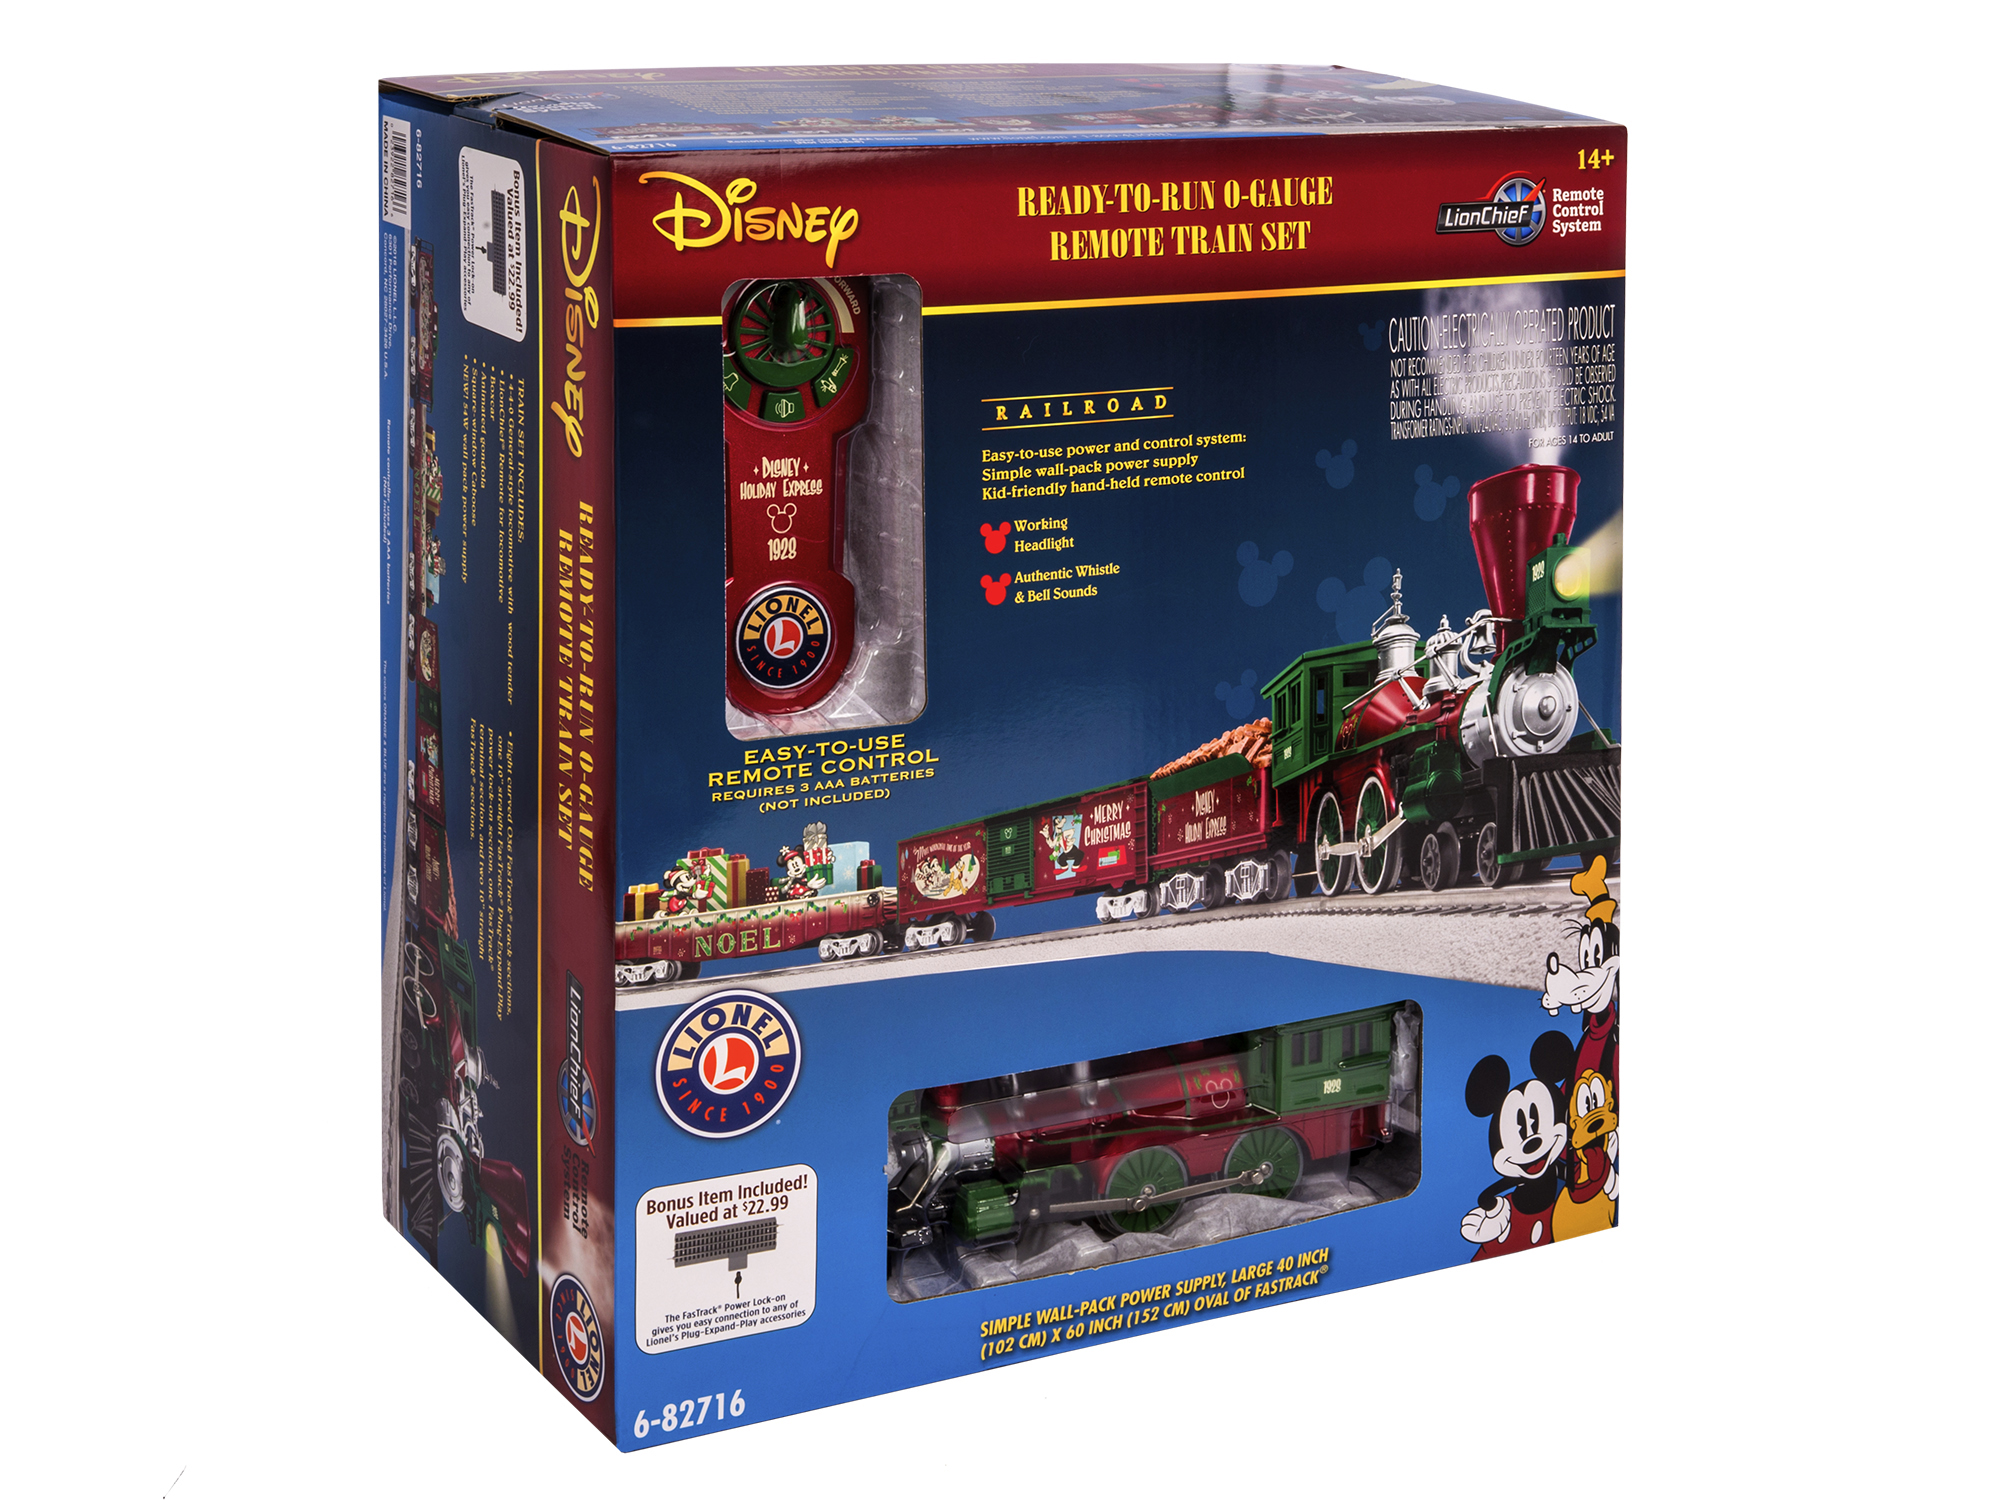 6-83964 "MICKEY'S HOLIDAY TO REMEMBER" LIONCHIEF® SET